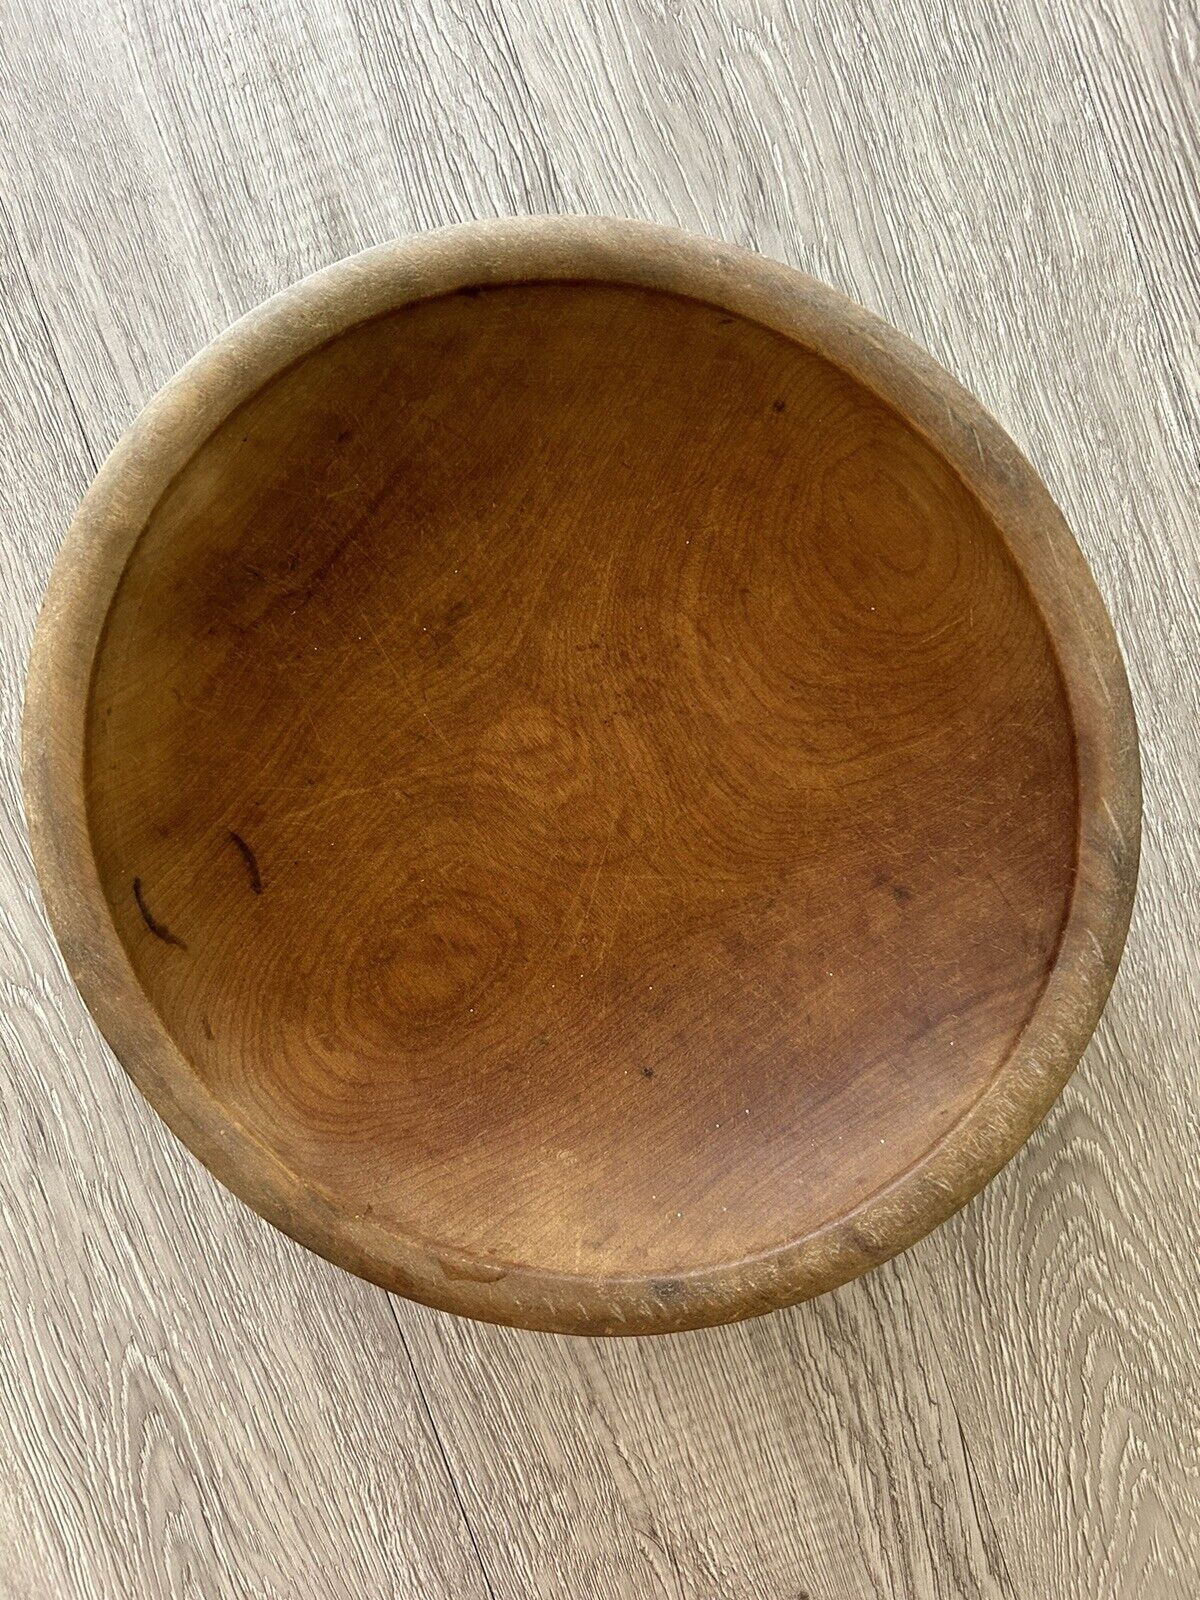 Vintage Turned Wooden Bowl Out Of Round 10.5”x11” Handcrafted Folk Rustic